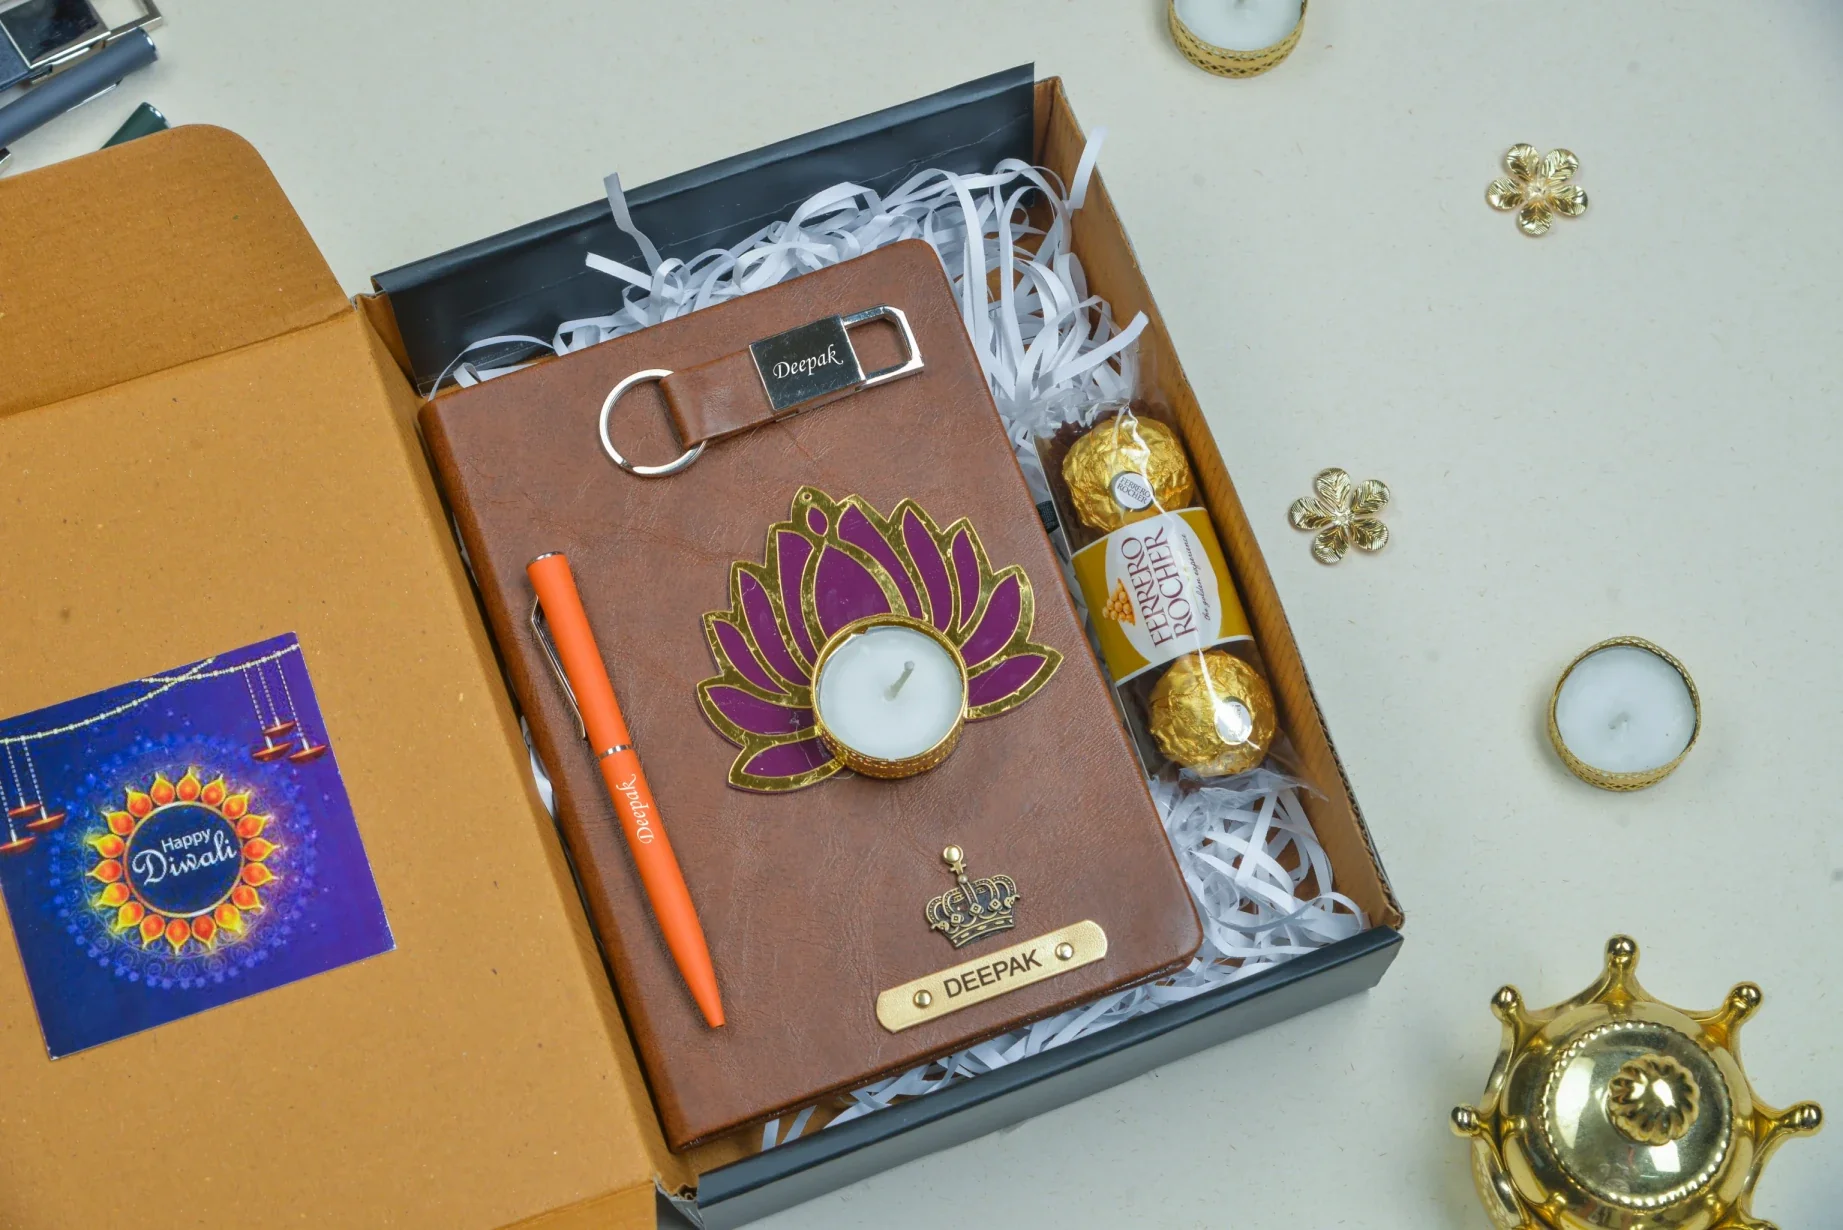 Make your Diwali celebration truly special with our customizable Diwali combo. This set includes a premium quality diary, a stylish keychain, a traditional diya, delicious chocolates, and a high-quality pen, all designed to bring a touch of traditional elegance and practicality to your Diwali celebrations.